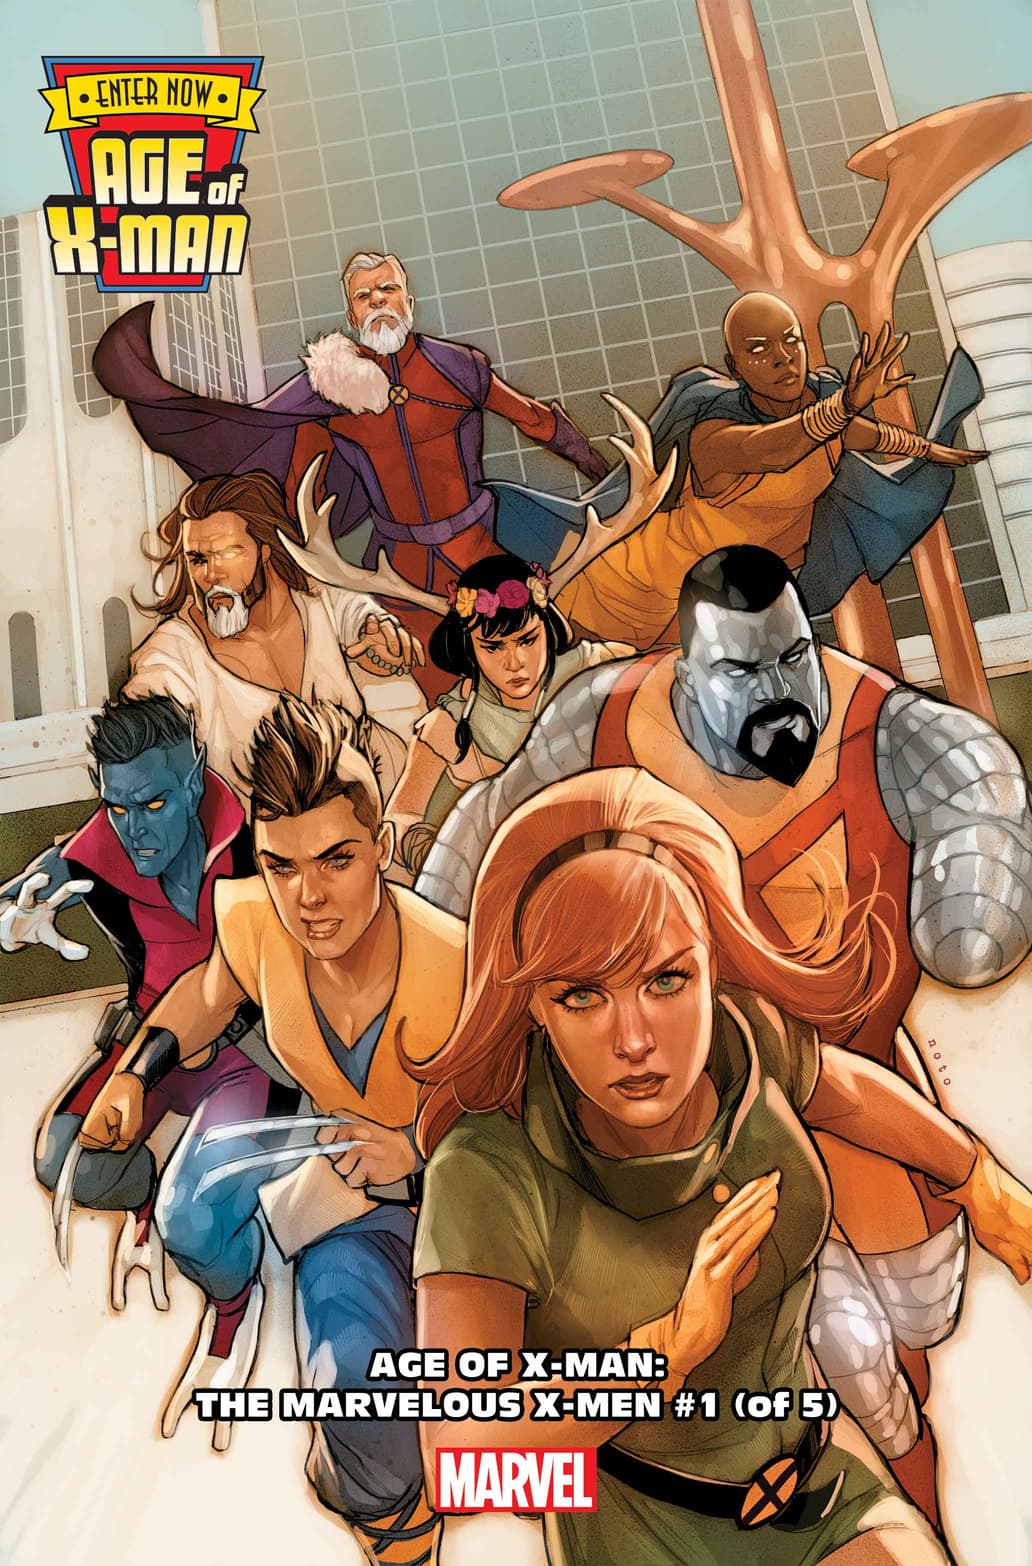 Age of X-Man: The Marvelous X-Men #1 cover by Phil Noto